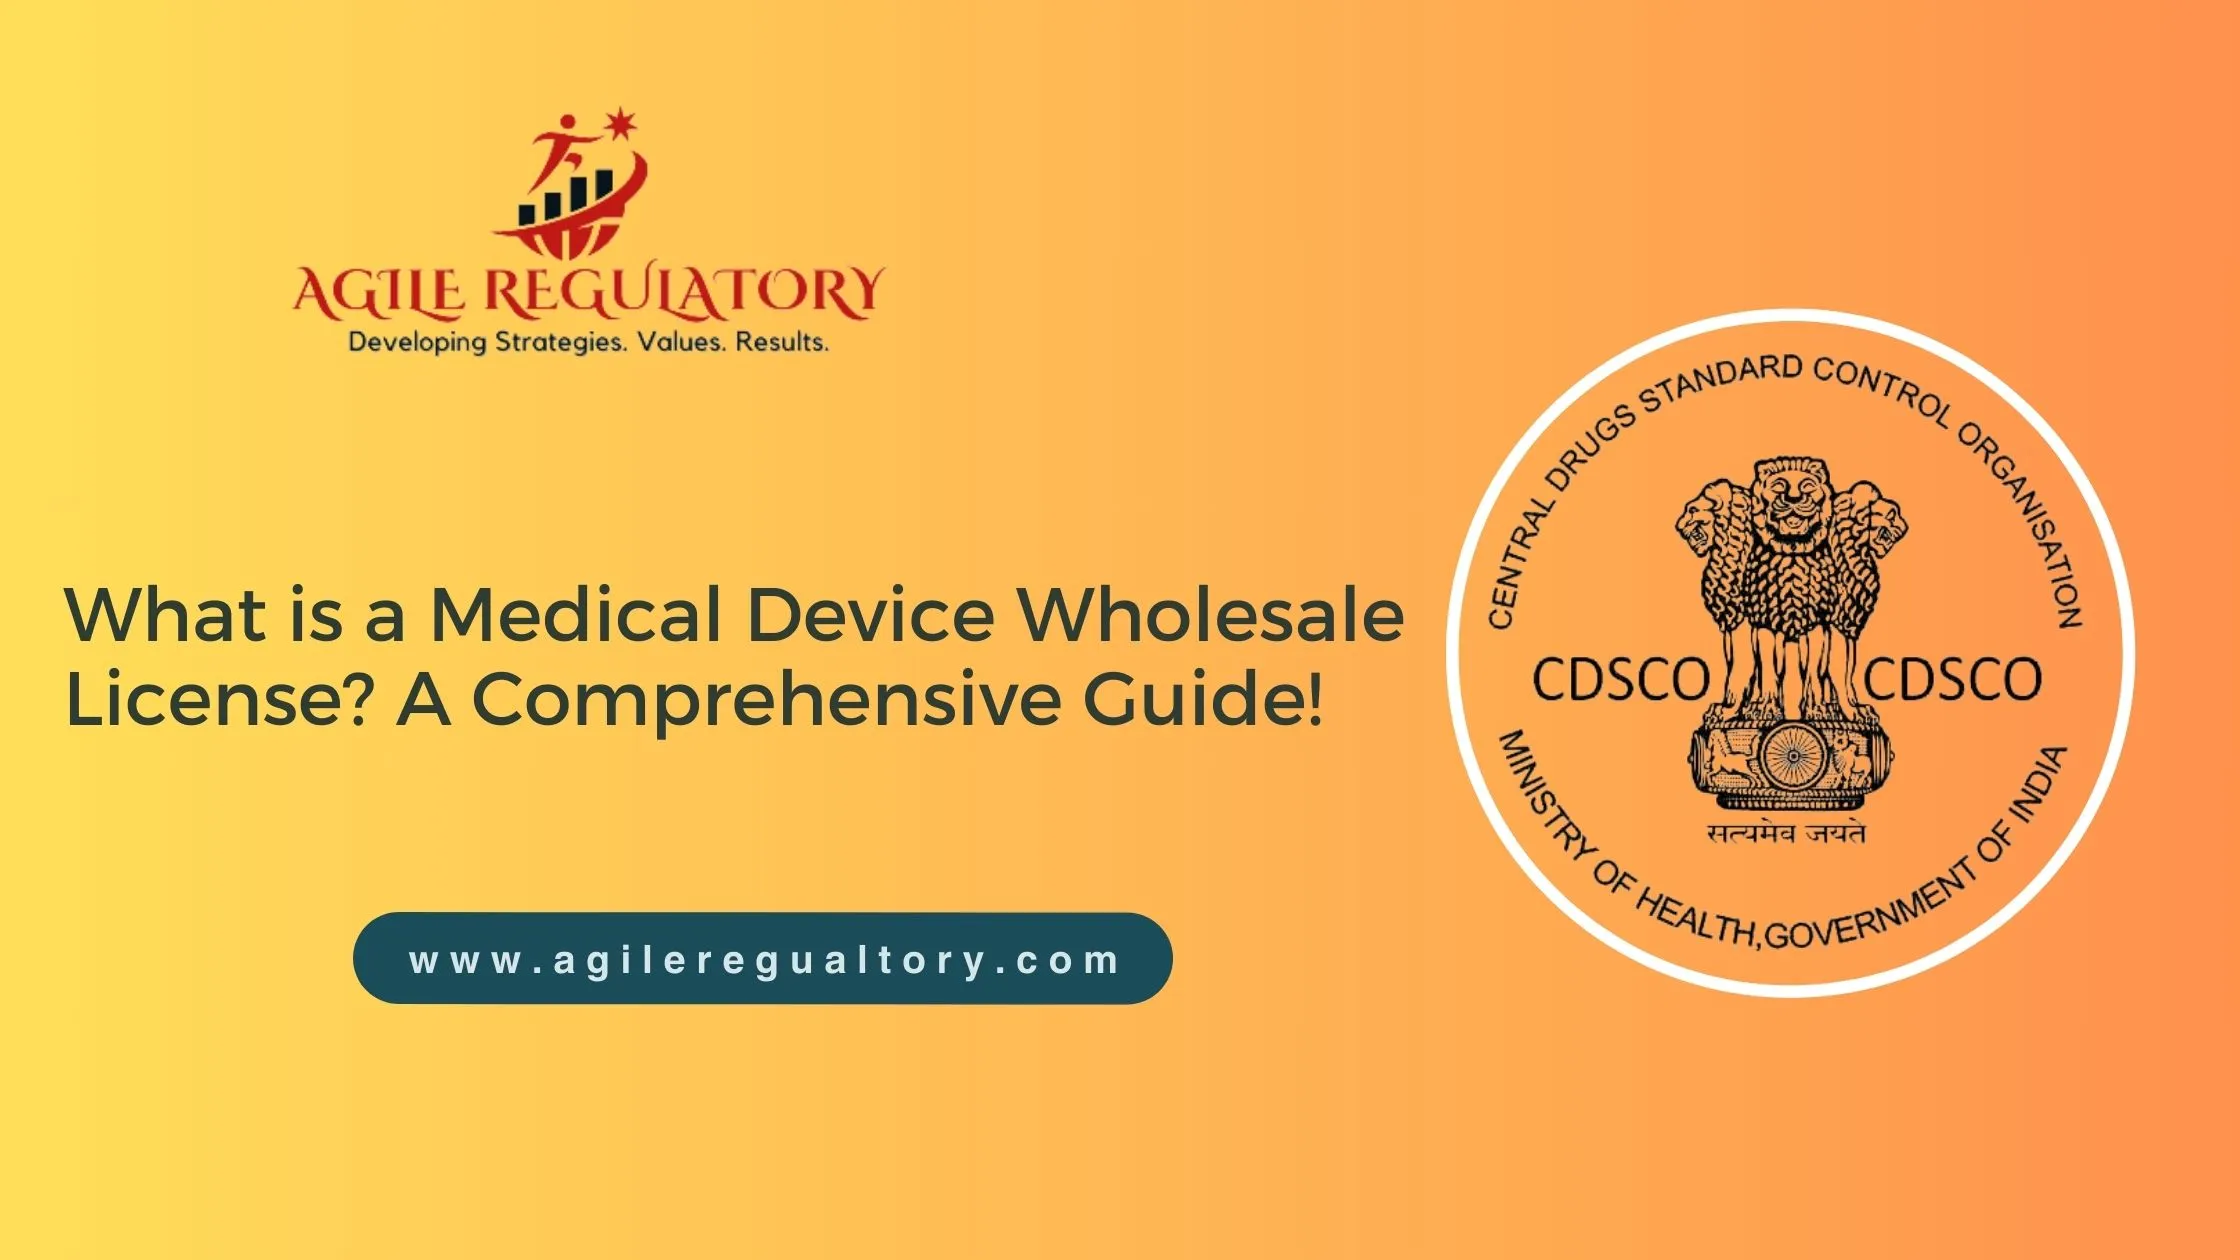 What is Medical Device Wholesale License?